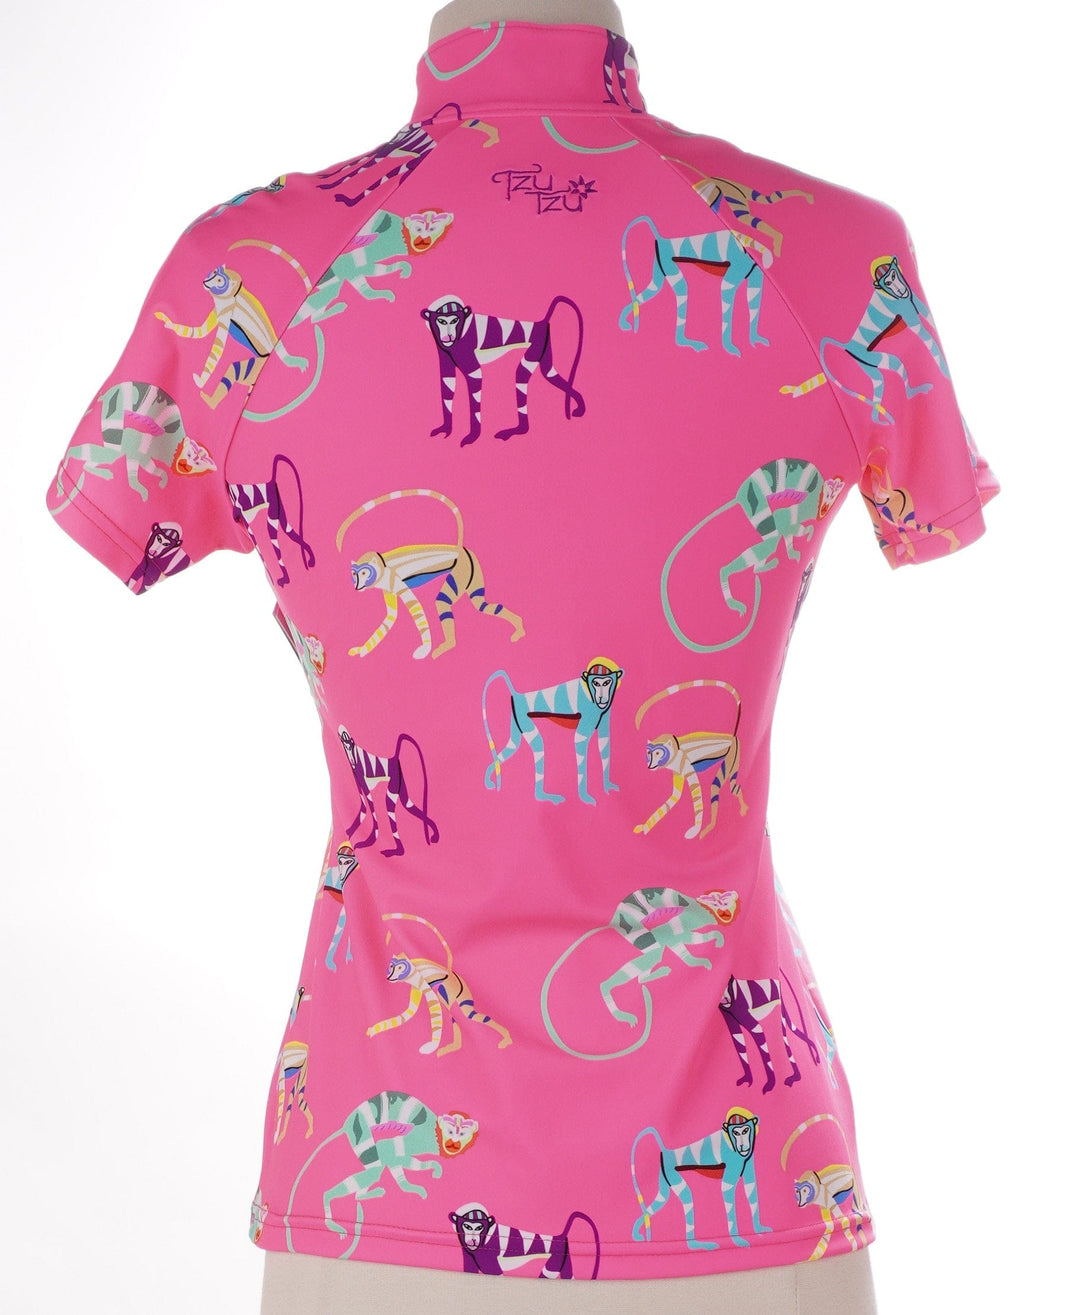 Tzu Tzu Pink / X-Small / Exclusive New Product Tzu Tzu Lucy Short Sleeve Top - Pink Monkey See - Size X-Small